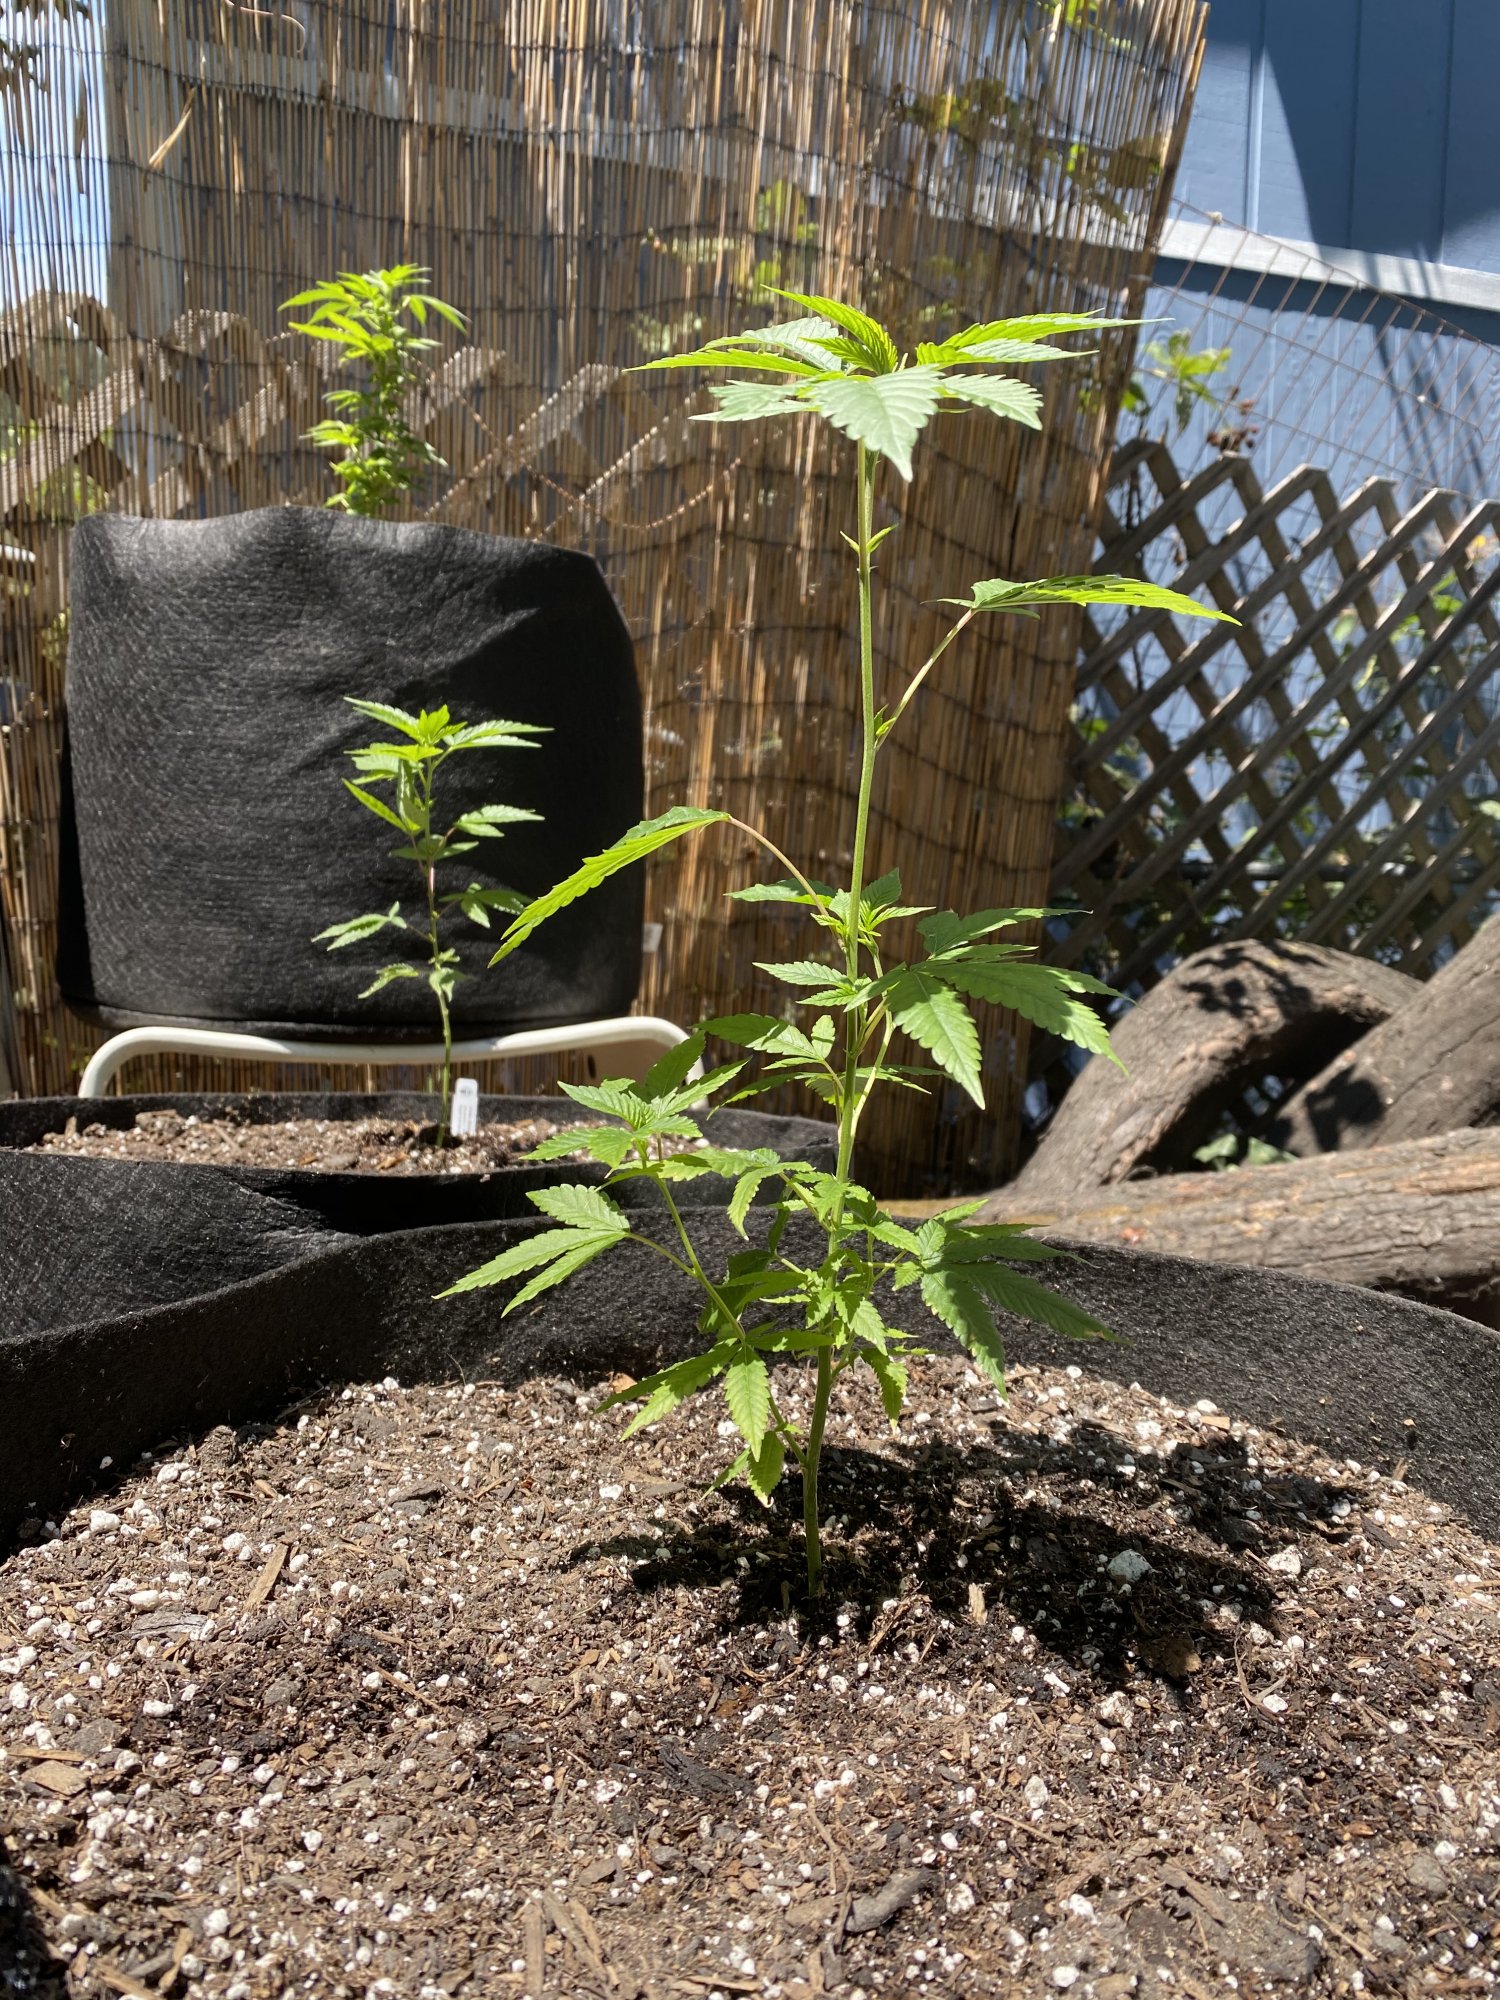 New outdoor grower looking for advice 4